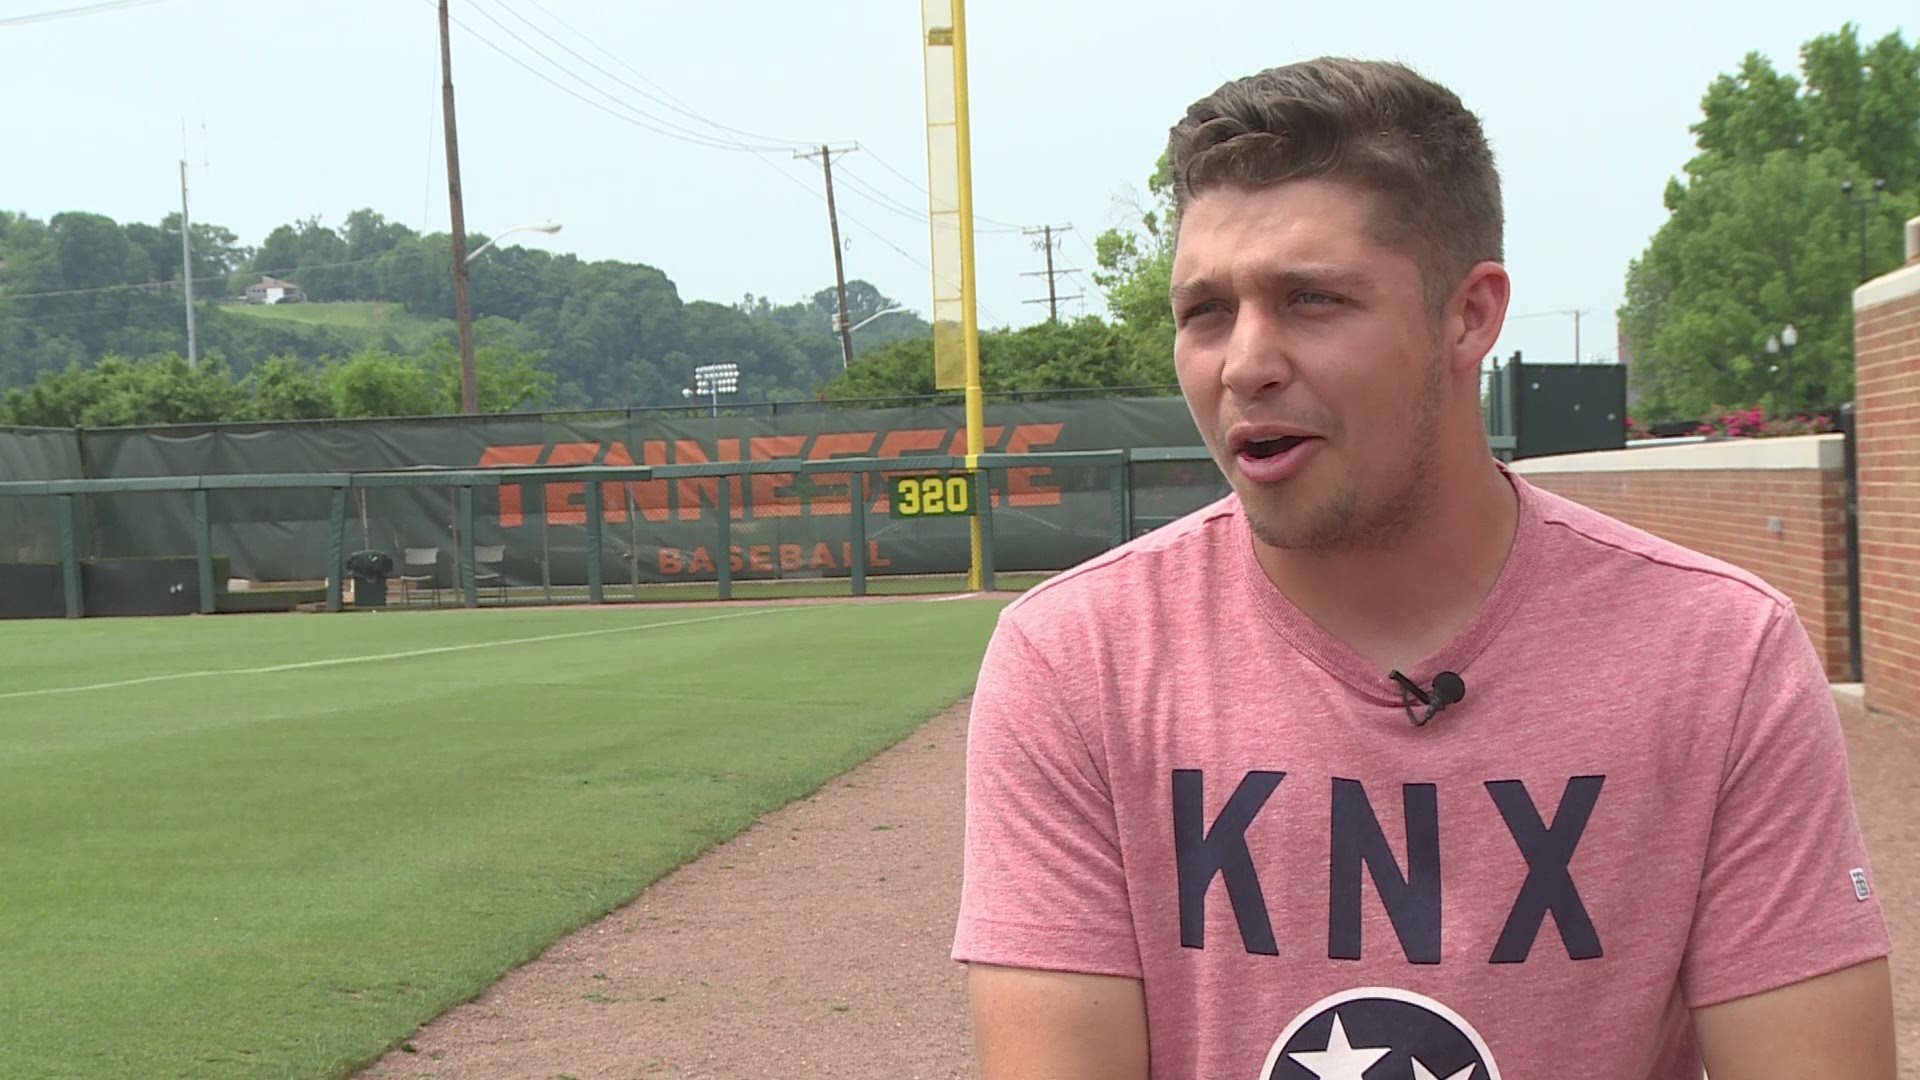 Vols catcher Nico Mascia leads the team with a .444 on-base percentage and has made 31 starts this year as a redshirt sophomore. He talks about how he ended up at UT even though he didn't plan on playing baseball in college and how he went from bullpen ca